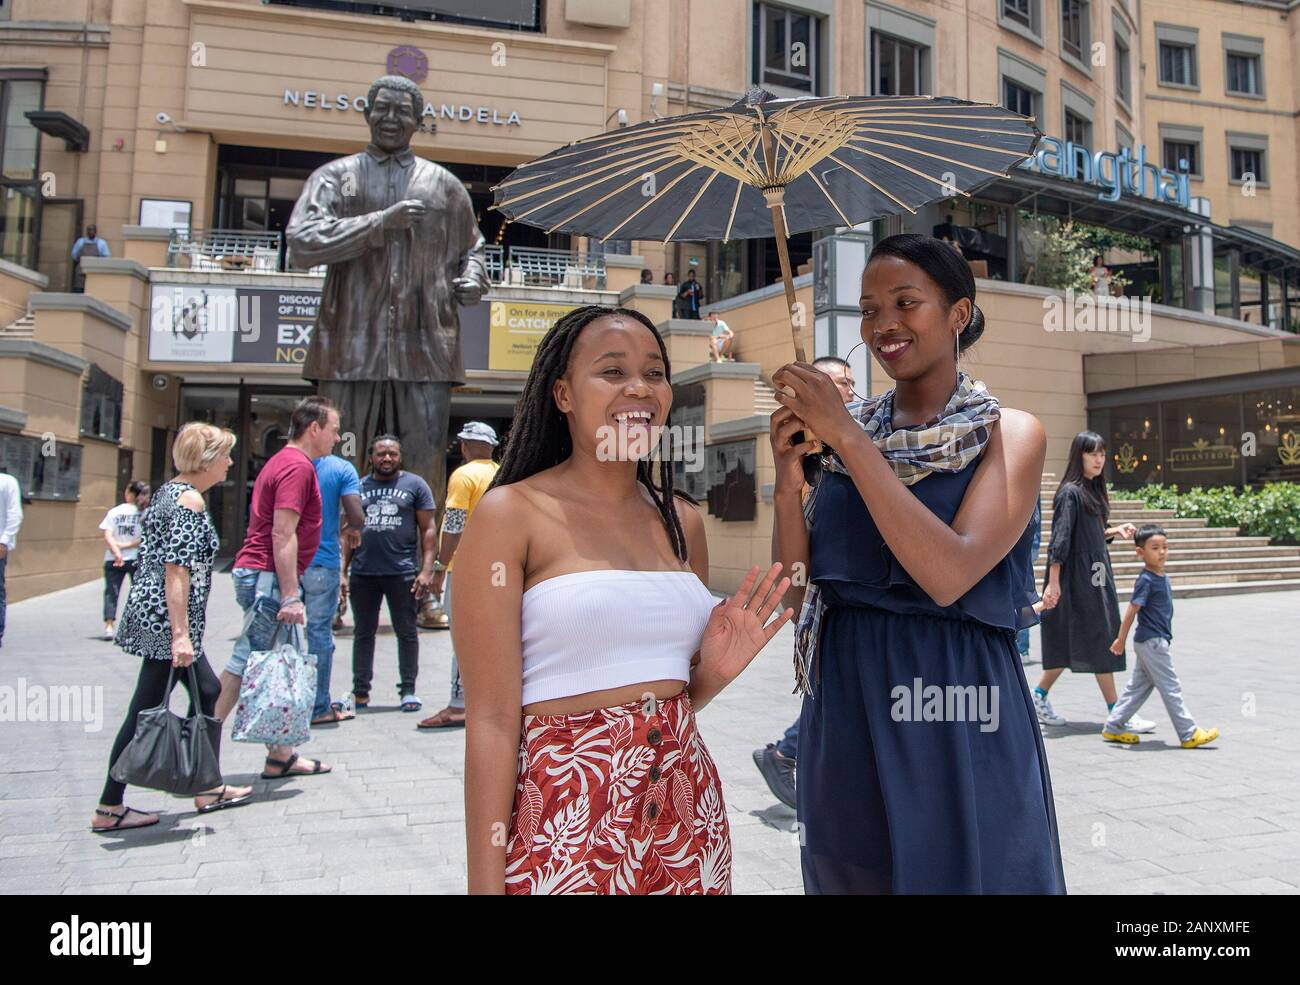 Johannesburg, South Africa. 19th Jan, 2020. Locals holding a Chinese traditional oil-paper umbrella pose for photos during celebrations for the upcoming Chinese Lunar New Year in Johannesburg, South Africa, Jan. 19, 2020. Hundreds of Chinese and South Africans of all ages from different backgrounds gathered together at Nelson Mandela Square in Johannesburg on Sunday to celebrate Chinese Lunar New Year. A number of performers based both in China and South Africa entertained the attendees with music and dance. Credit: Chen Cheng/Xinhua/Alamy Live News Stock Photo